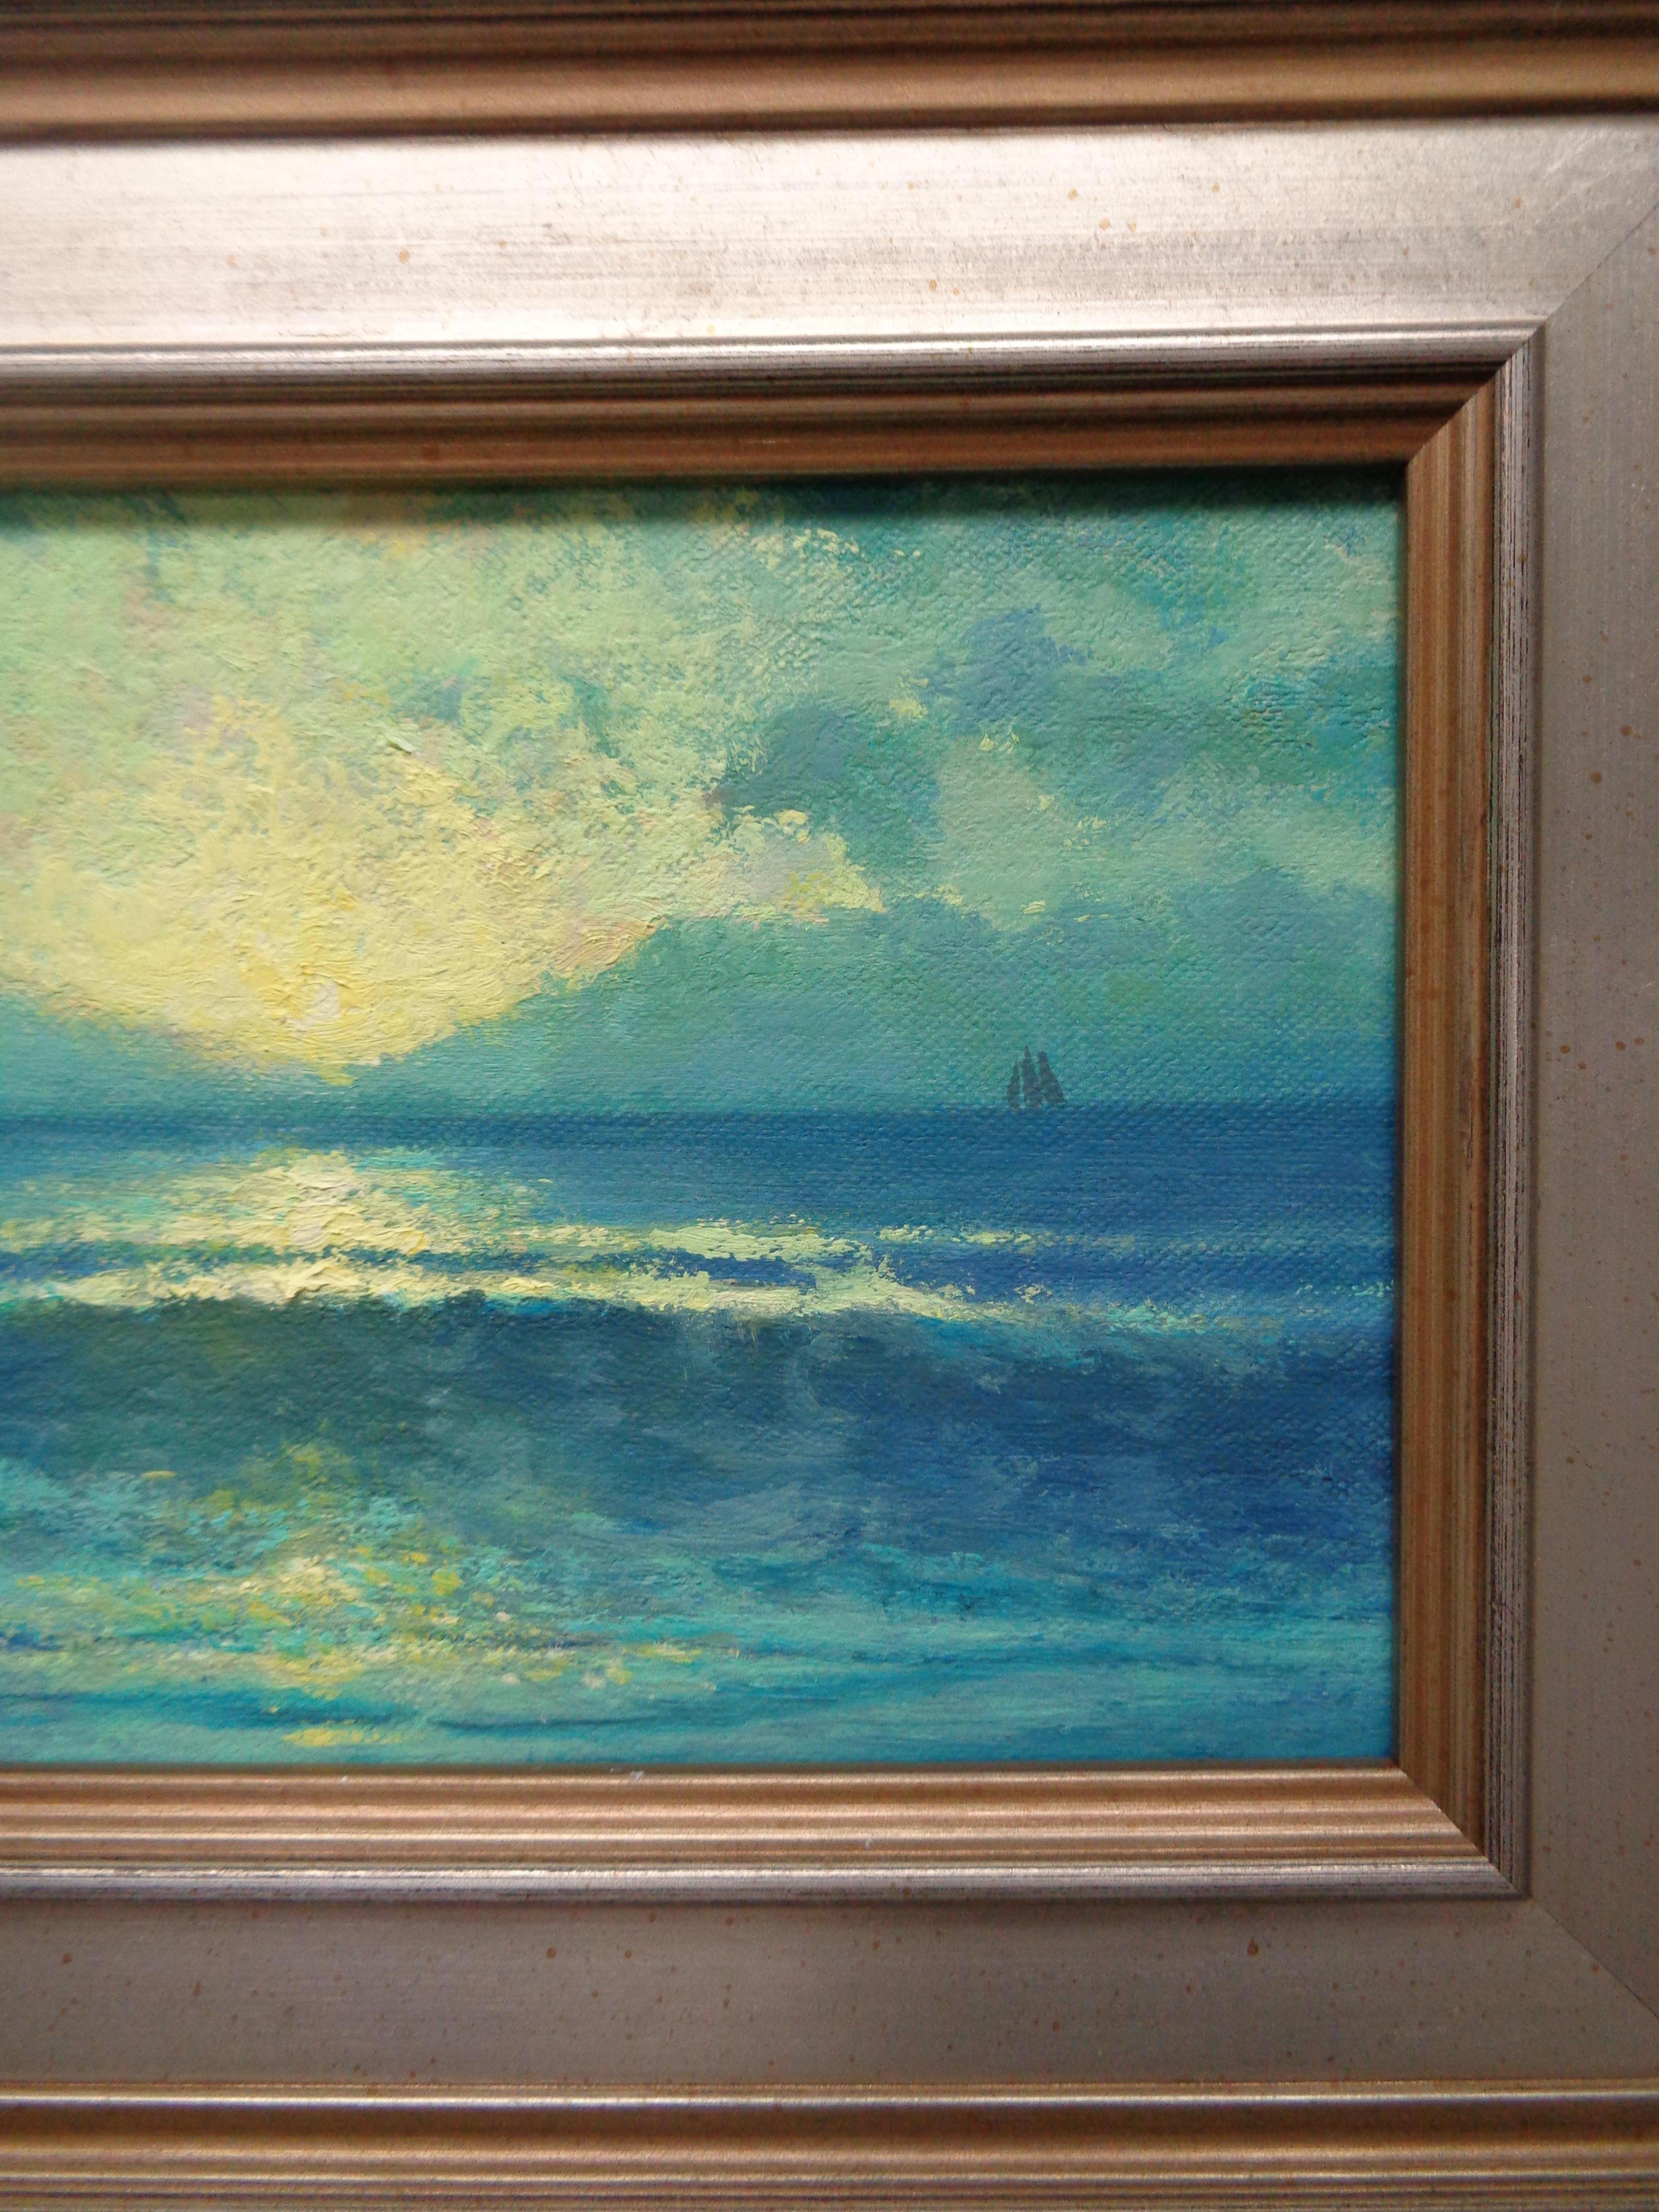 Beach Ocean Moonrise Sail Boat Impressionistic Oil Painting Michael Budden  2